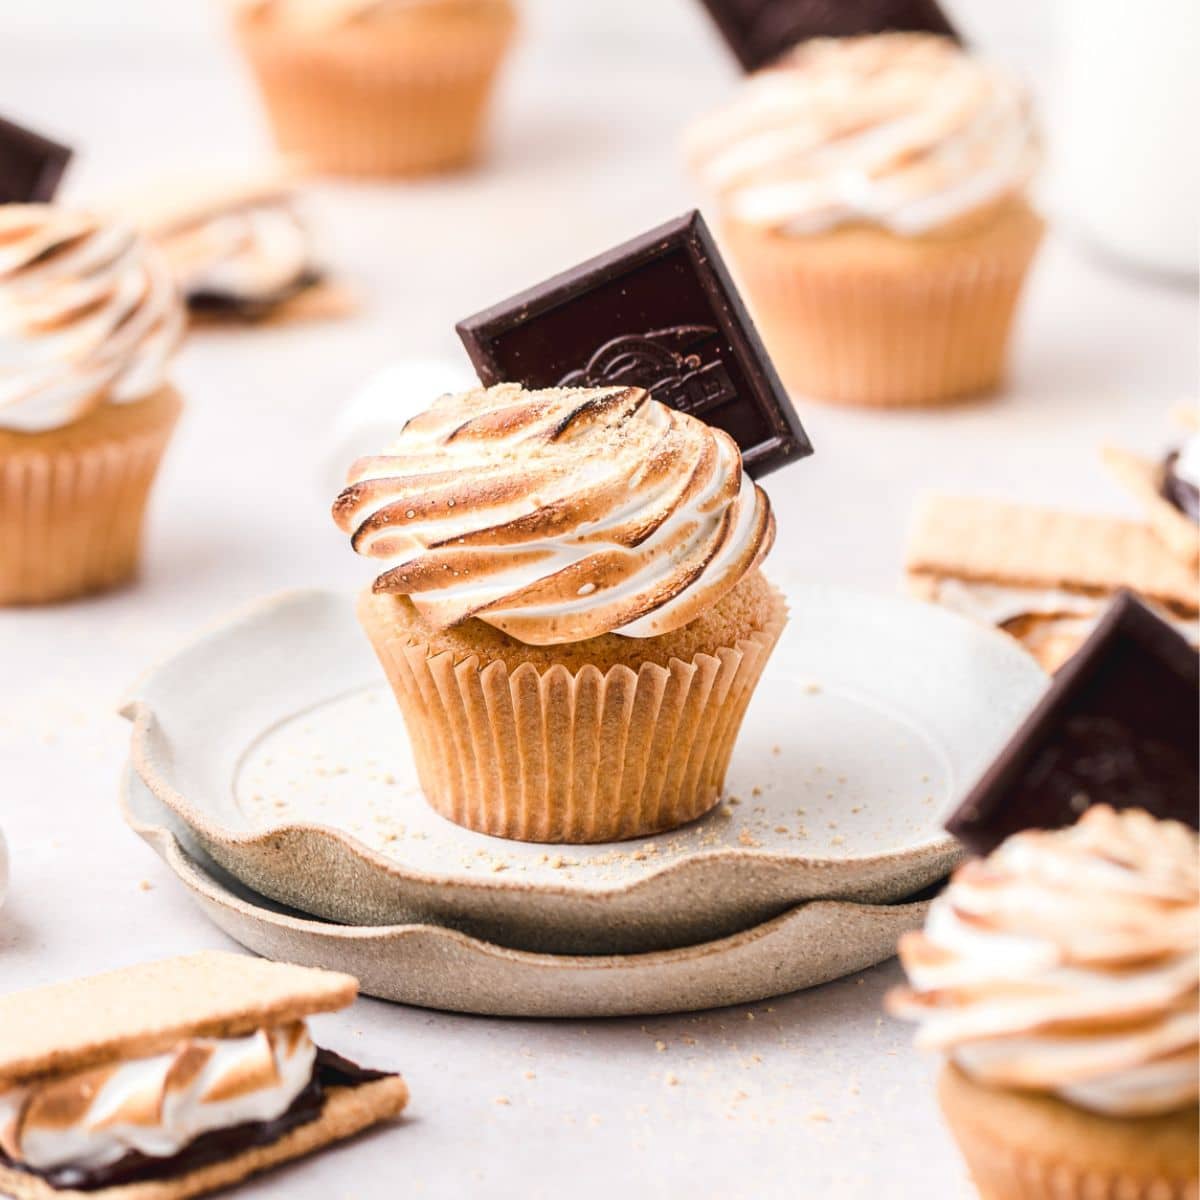 close up shot of s'mores cupcakes with toasted meringue and chocolate ganache.